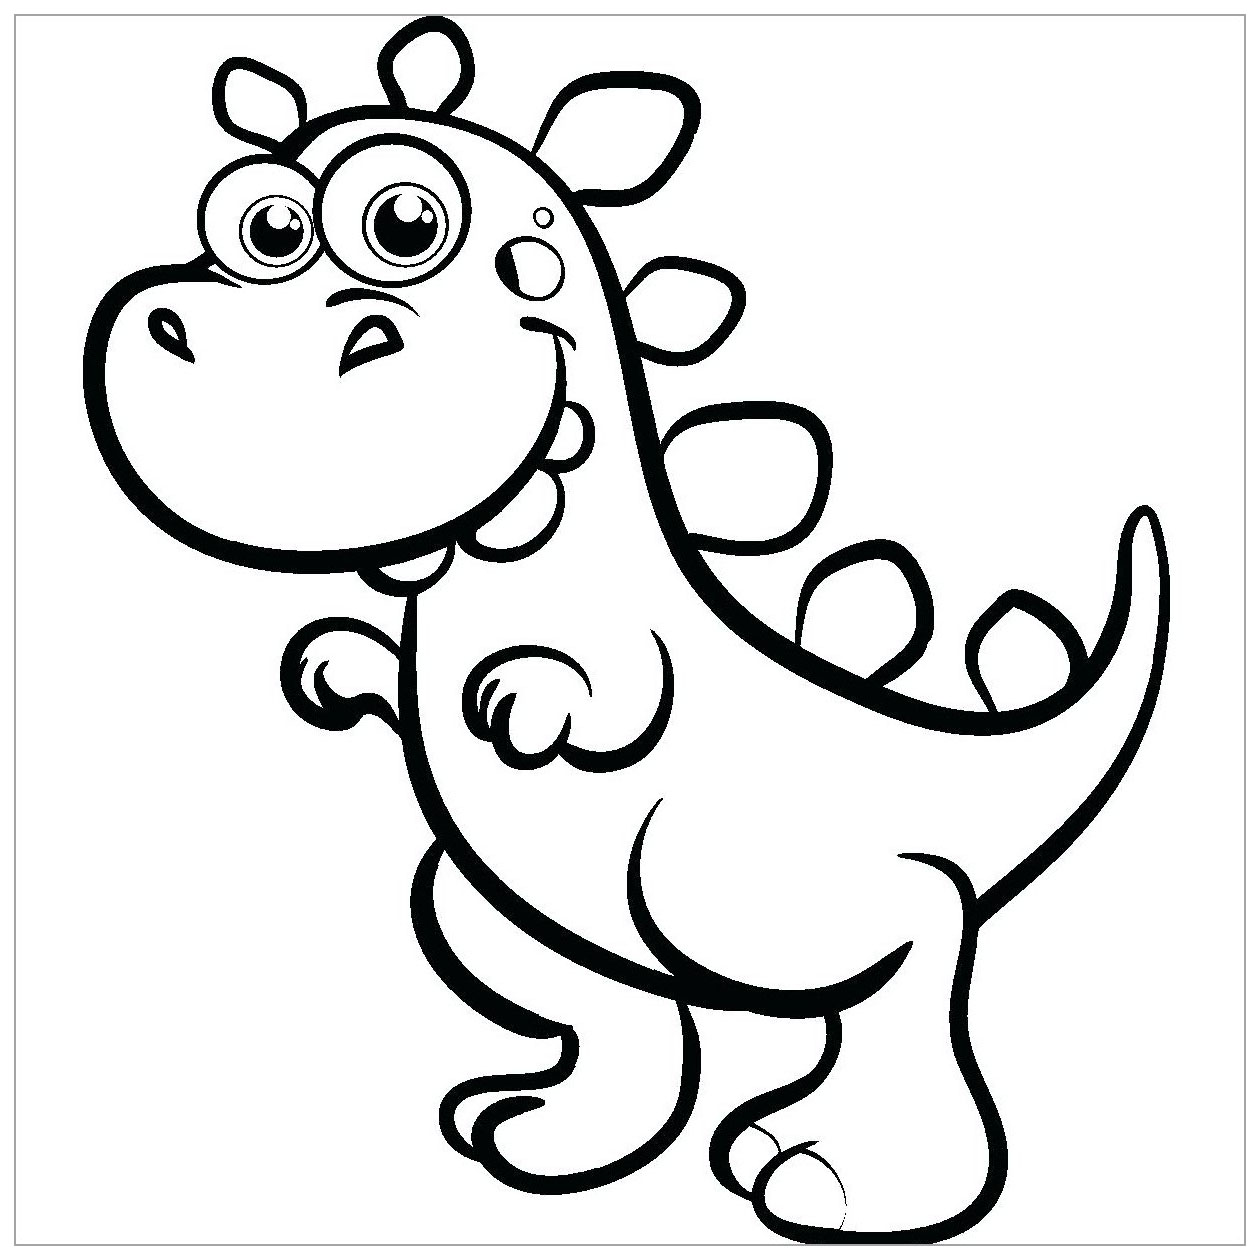 Small dinosaur - Dinosaurs Kids Coloring Pages